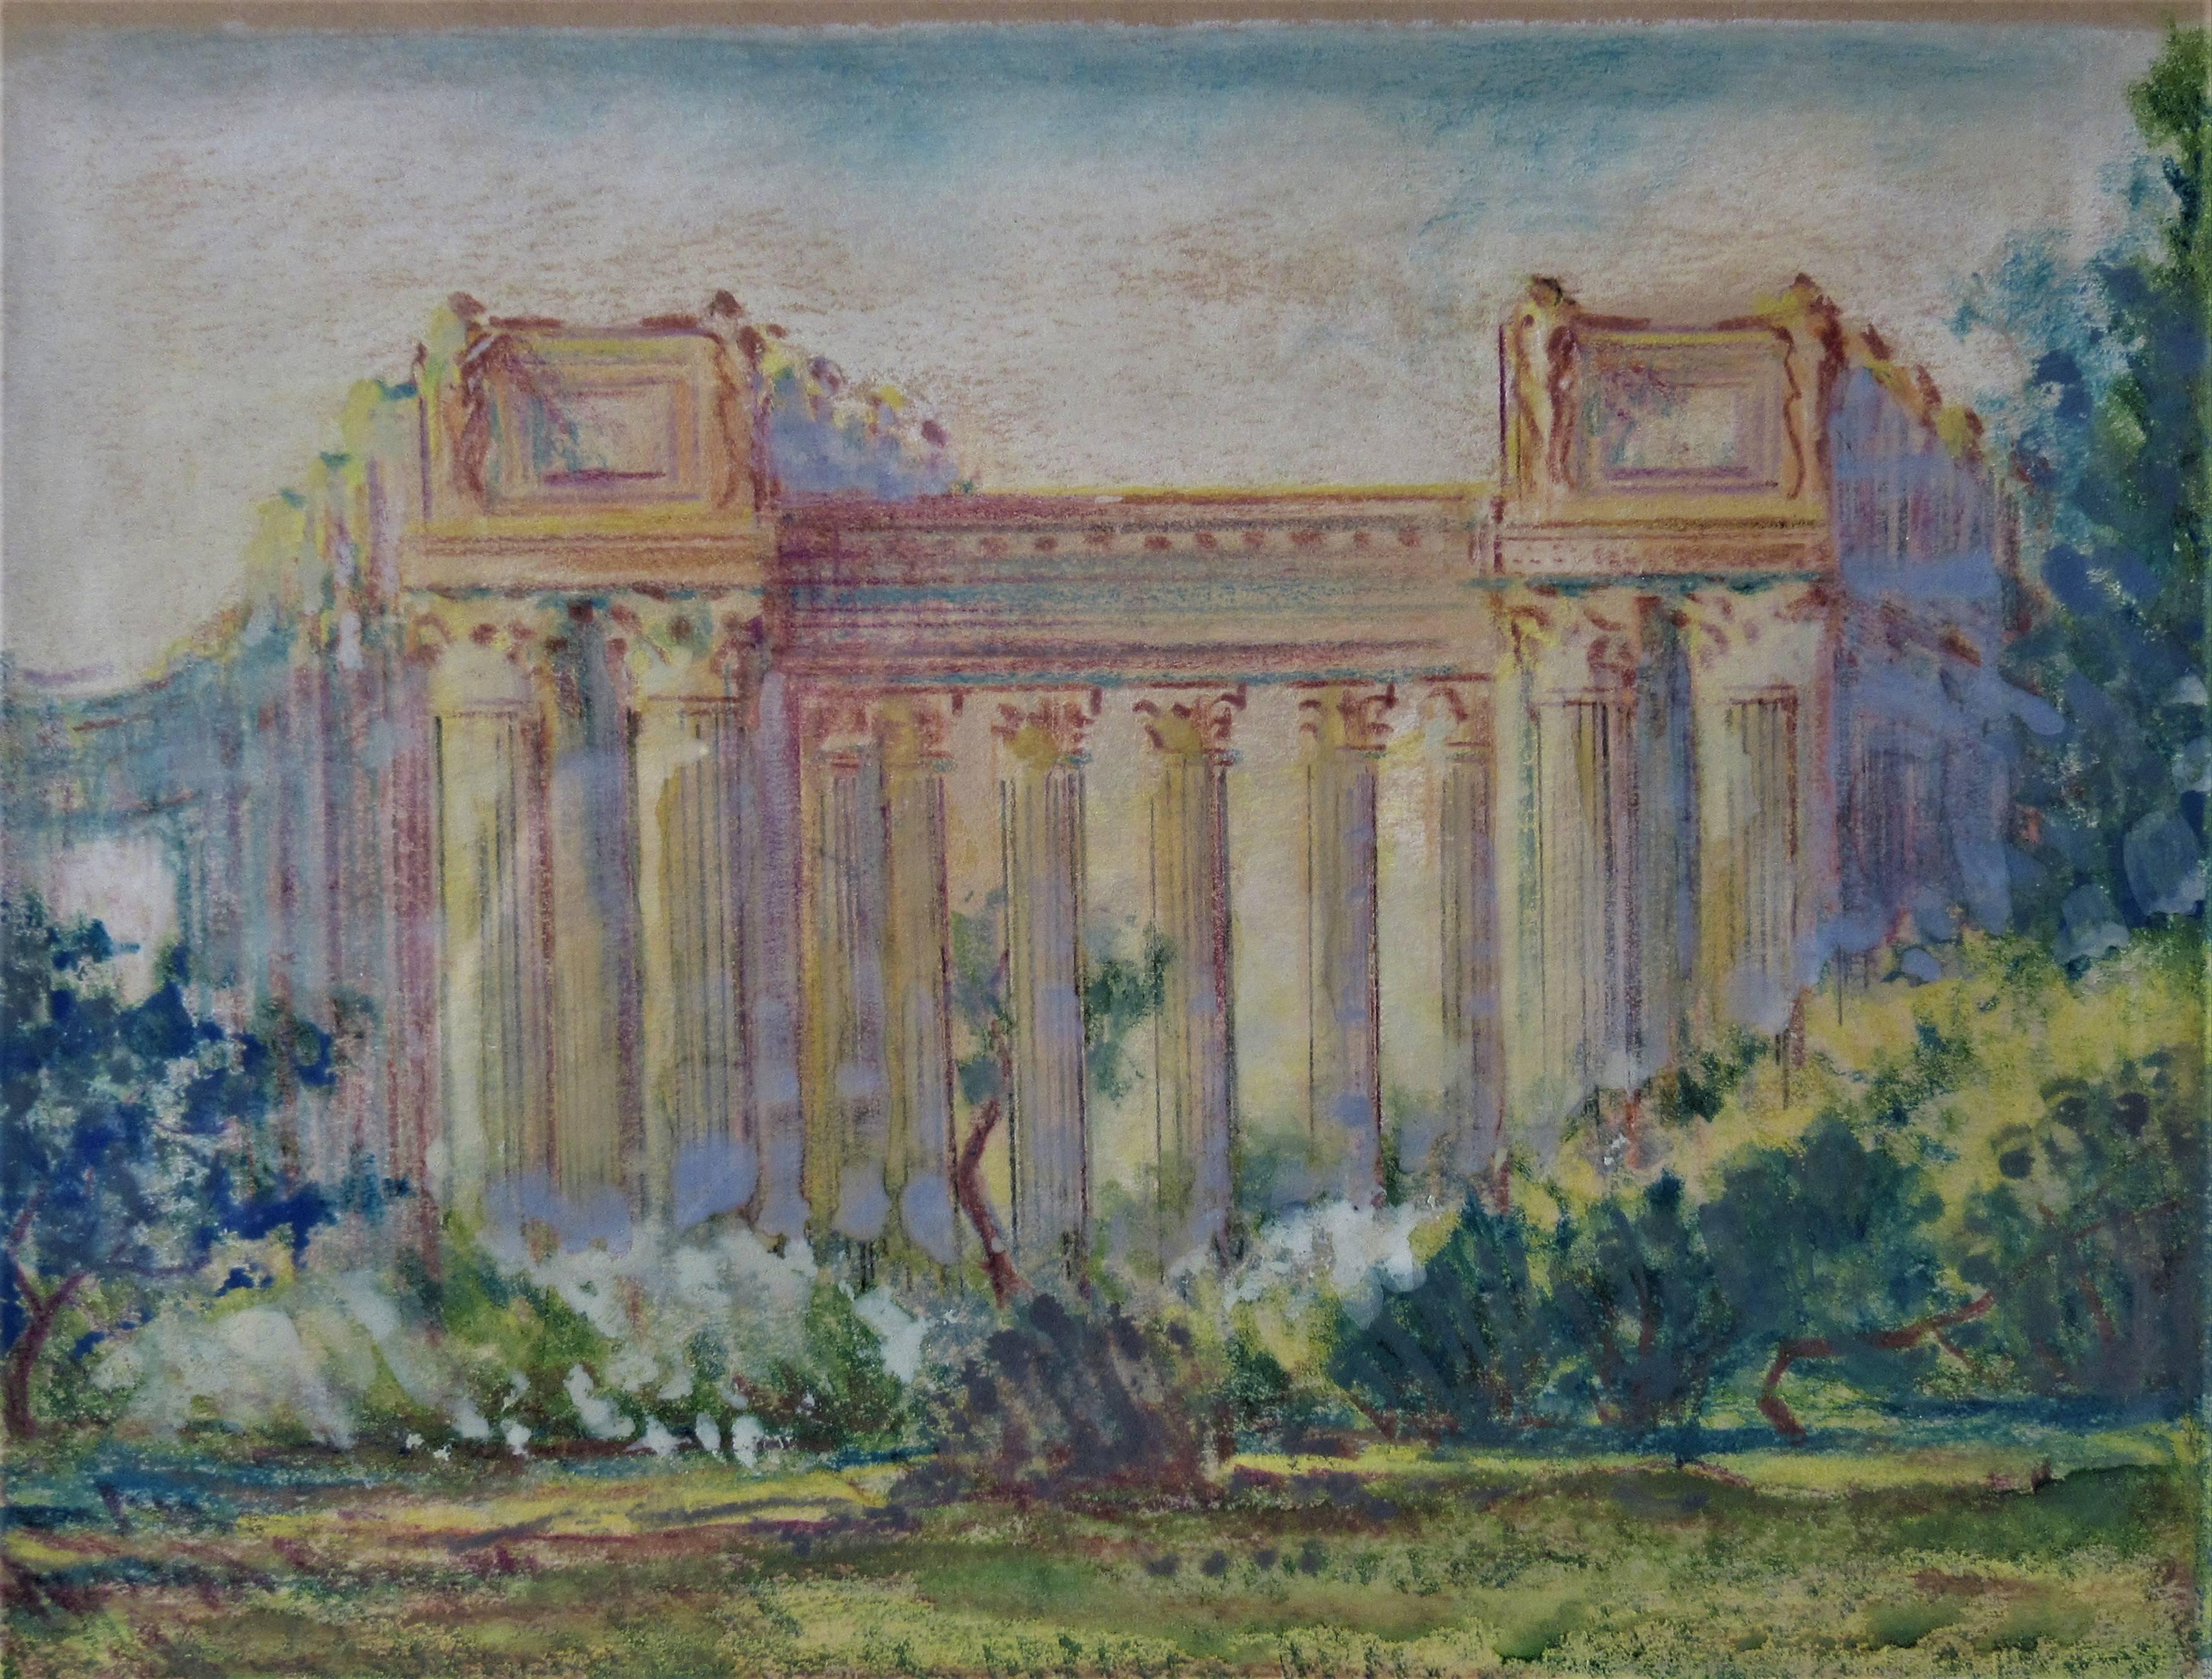 
Artist:   Harry Emerson Lewis (American, 1892-1958)
Title:    Palace of Fine Art, San Francisco
Year:    1931
Medium:	Pastel and watercolor
Paper:	Wove
Image size:   6.5 x 8.25 inches
Signature:     Hand signed in pencil lower right by the